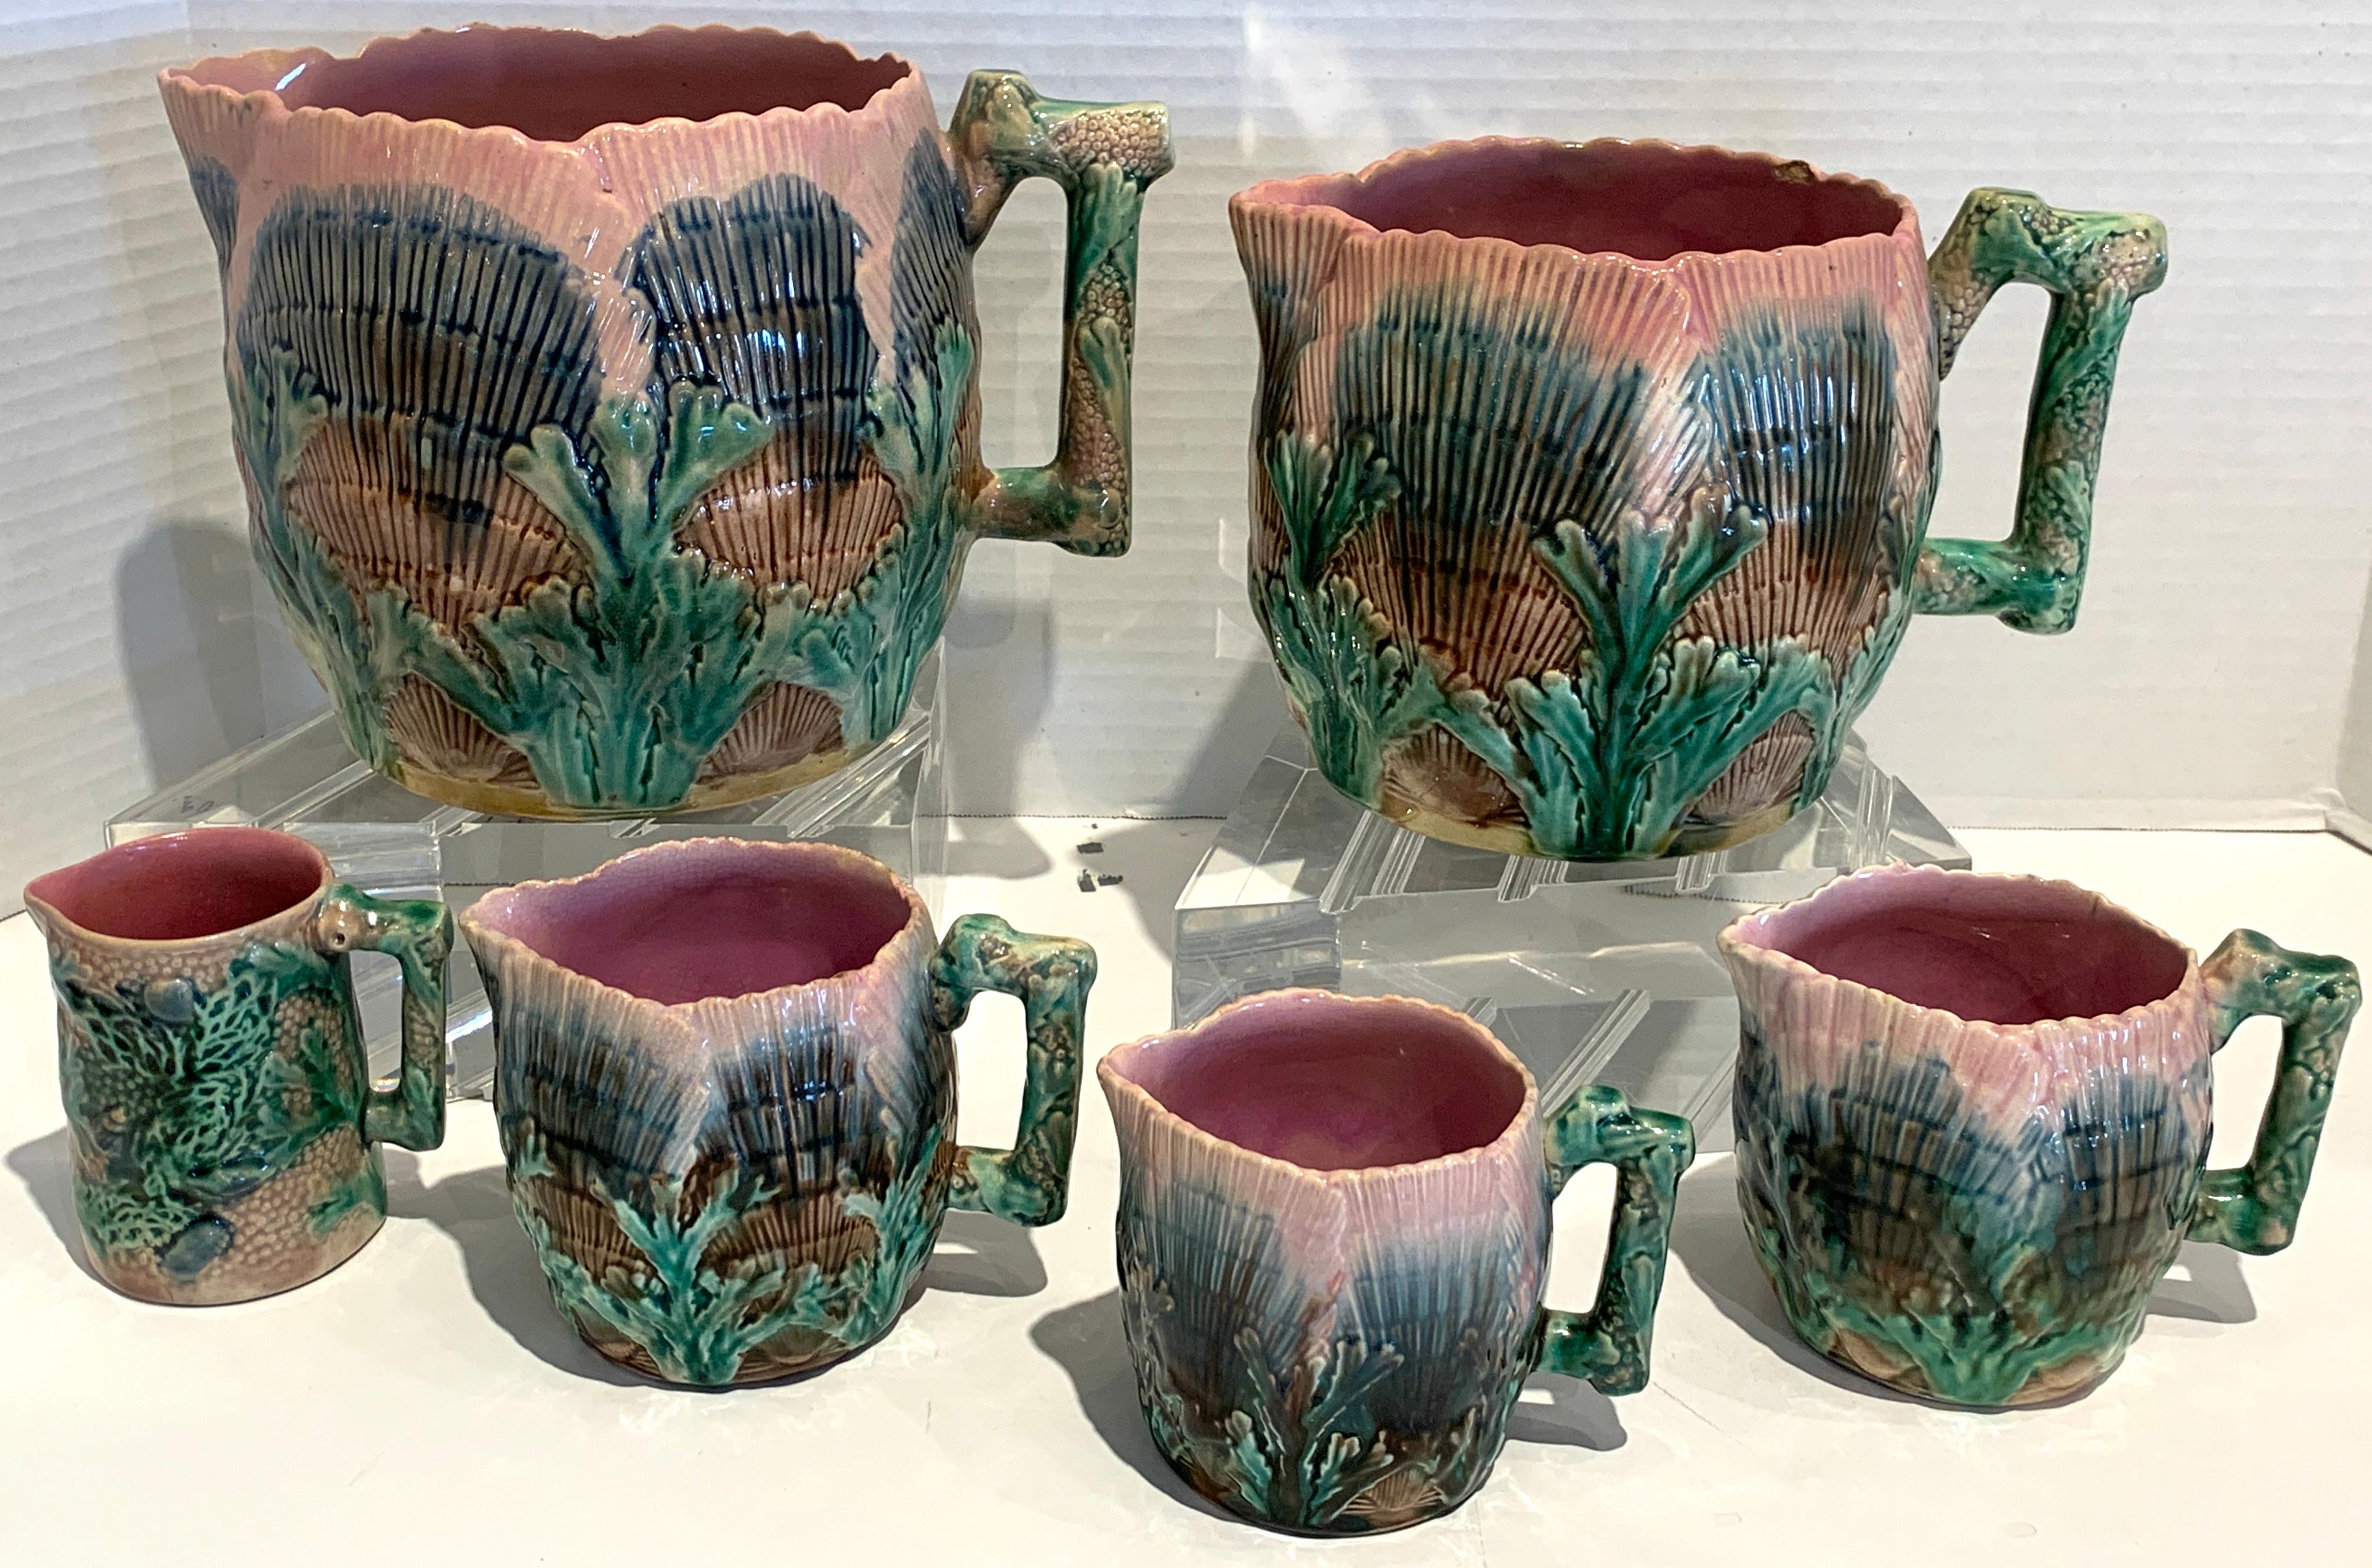 A collection of six Etruscan Majolica shell and seaweed pitchers, five in the typical shell and sea weed pattern, one in a variation of the pattern in the Narragansett style. A fine instant collection.
Pitcher #1 7